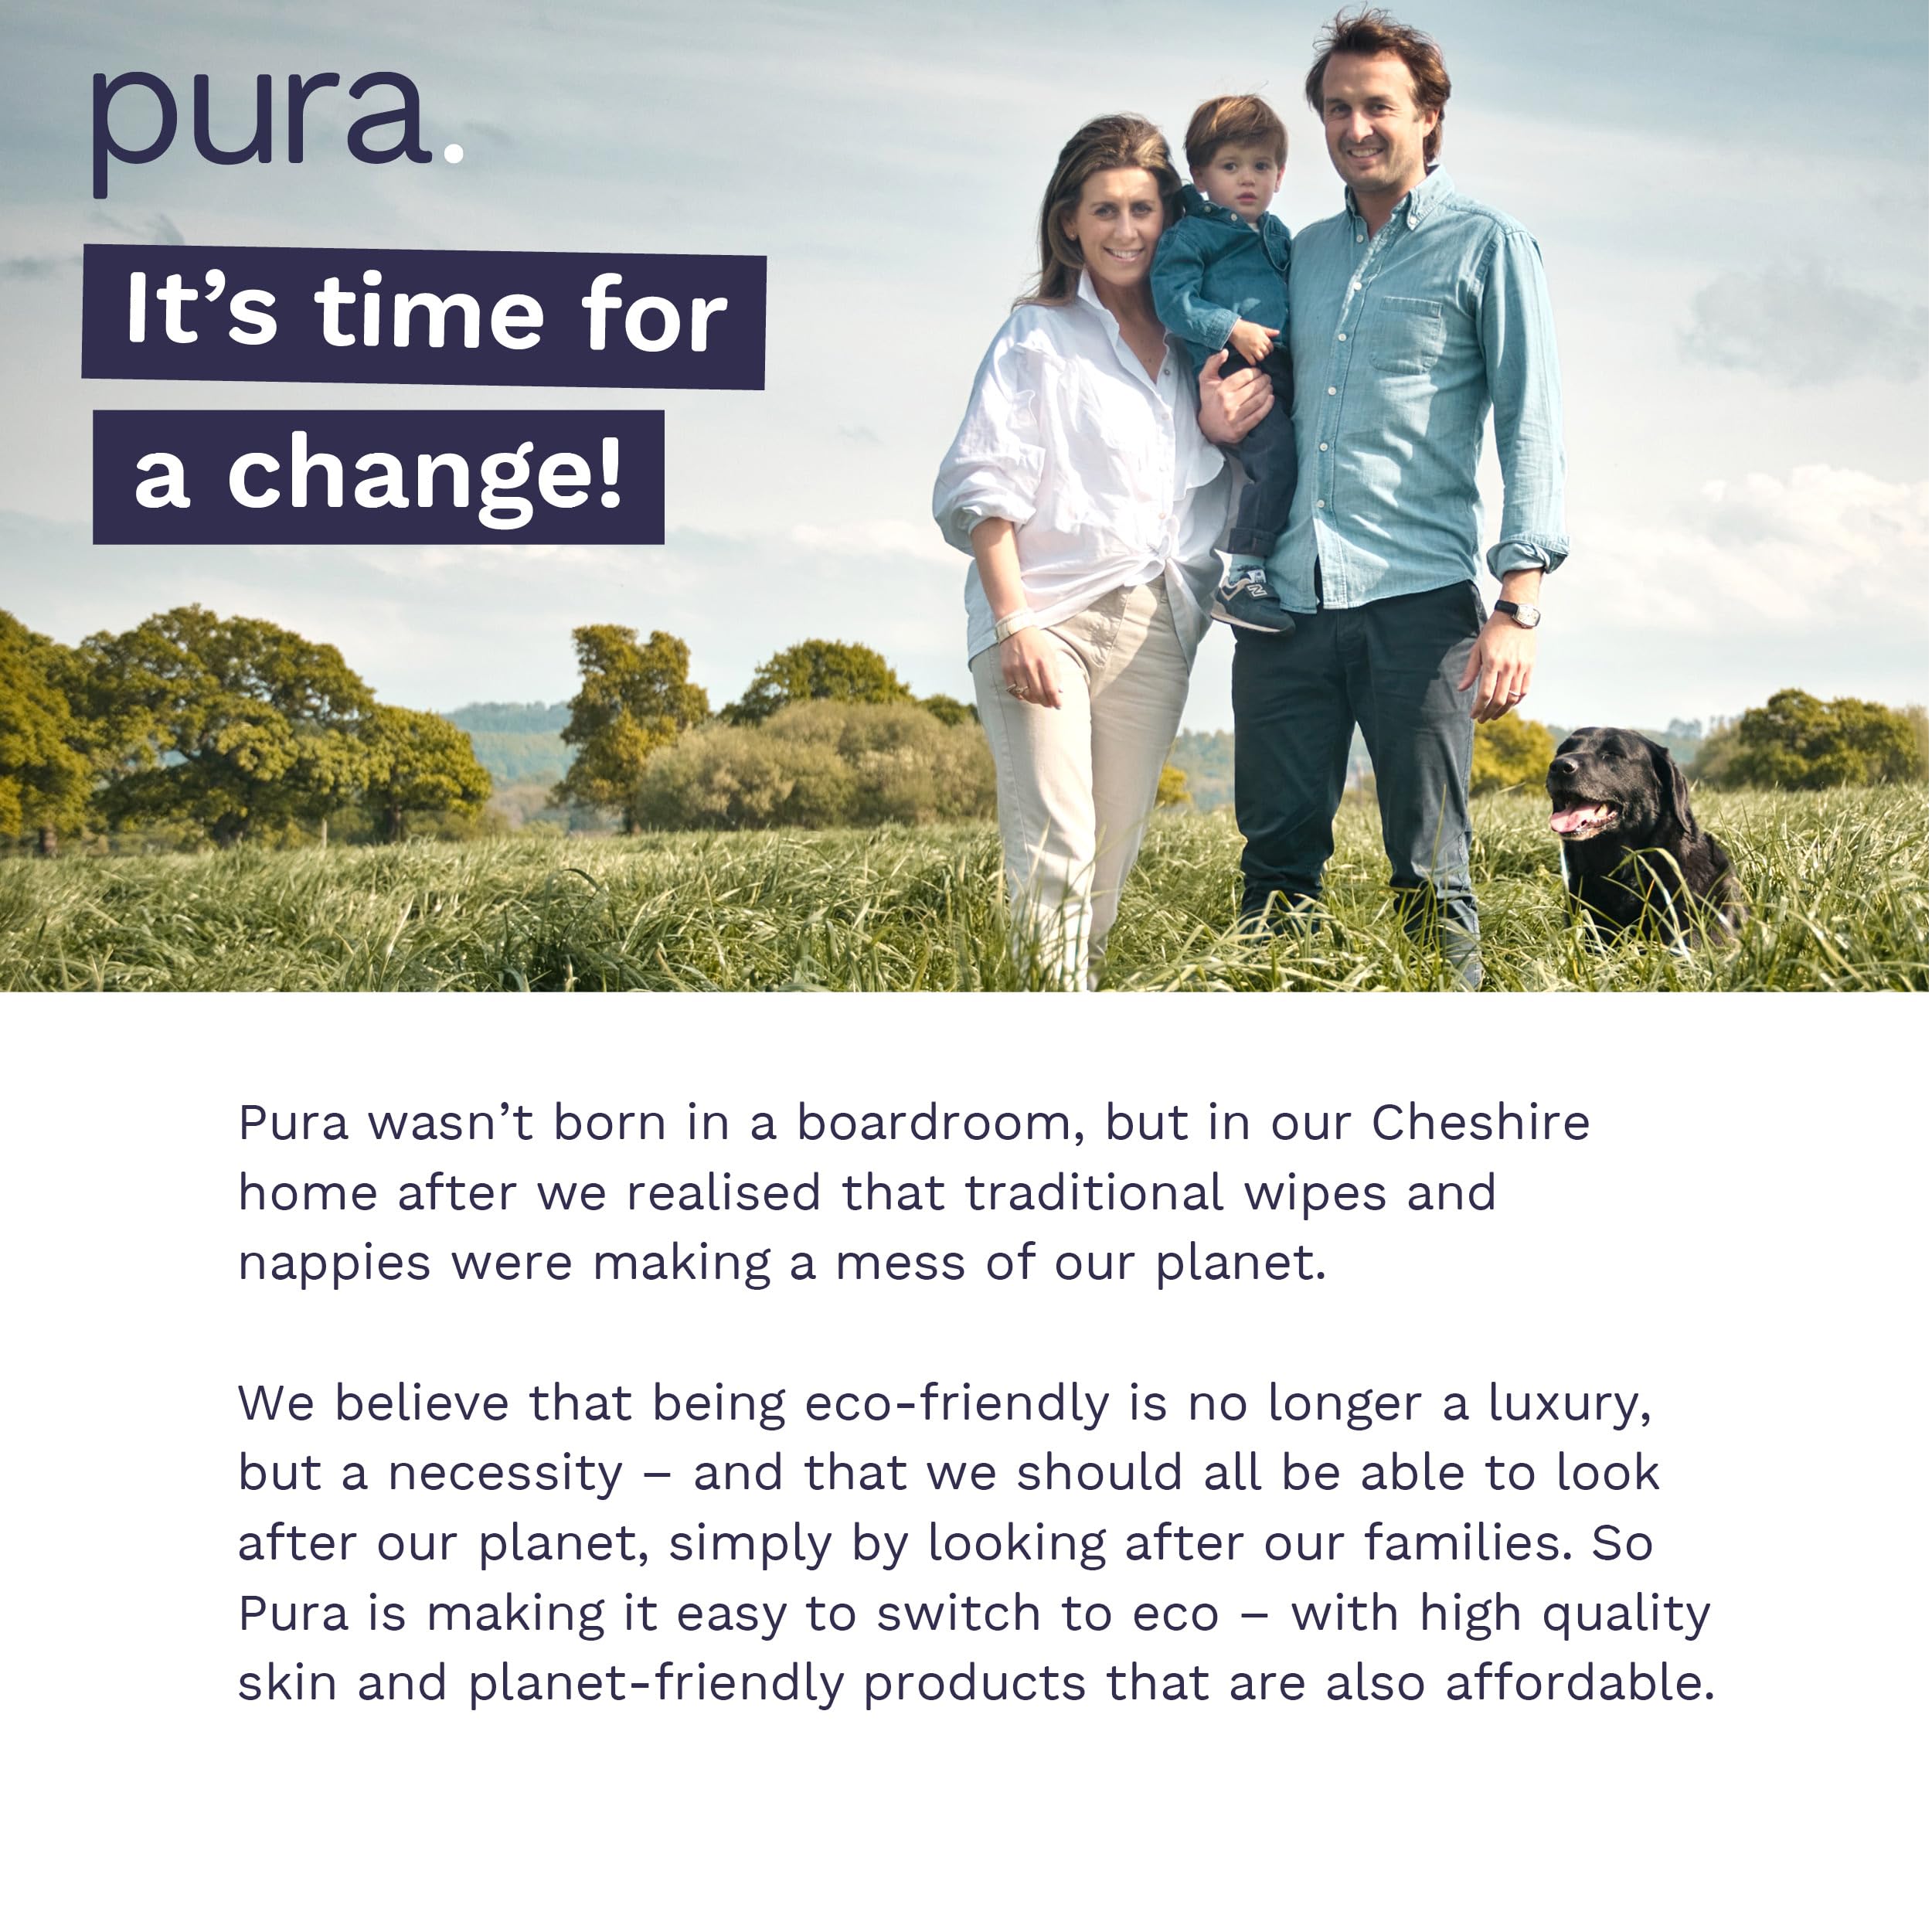 Pura Size 6 Eco-Friendly Diapers, 54 Count, Hypoallergenic, Soft Organic Cotton, Sustainable, up to 12 Hours Leak Protection, Allergy UK, Recyclable Paper Packaging